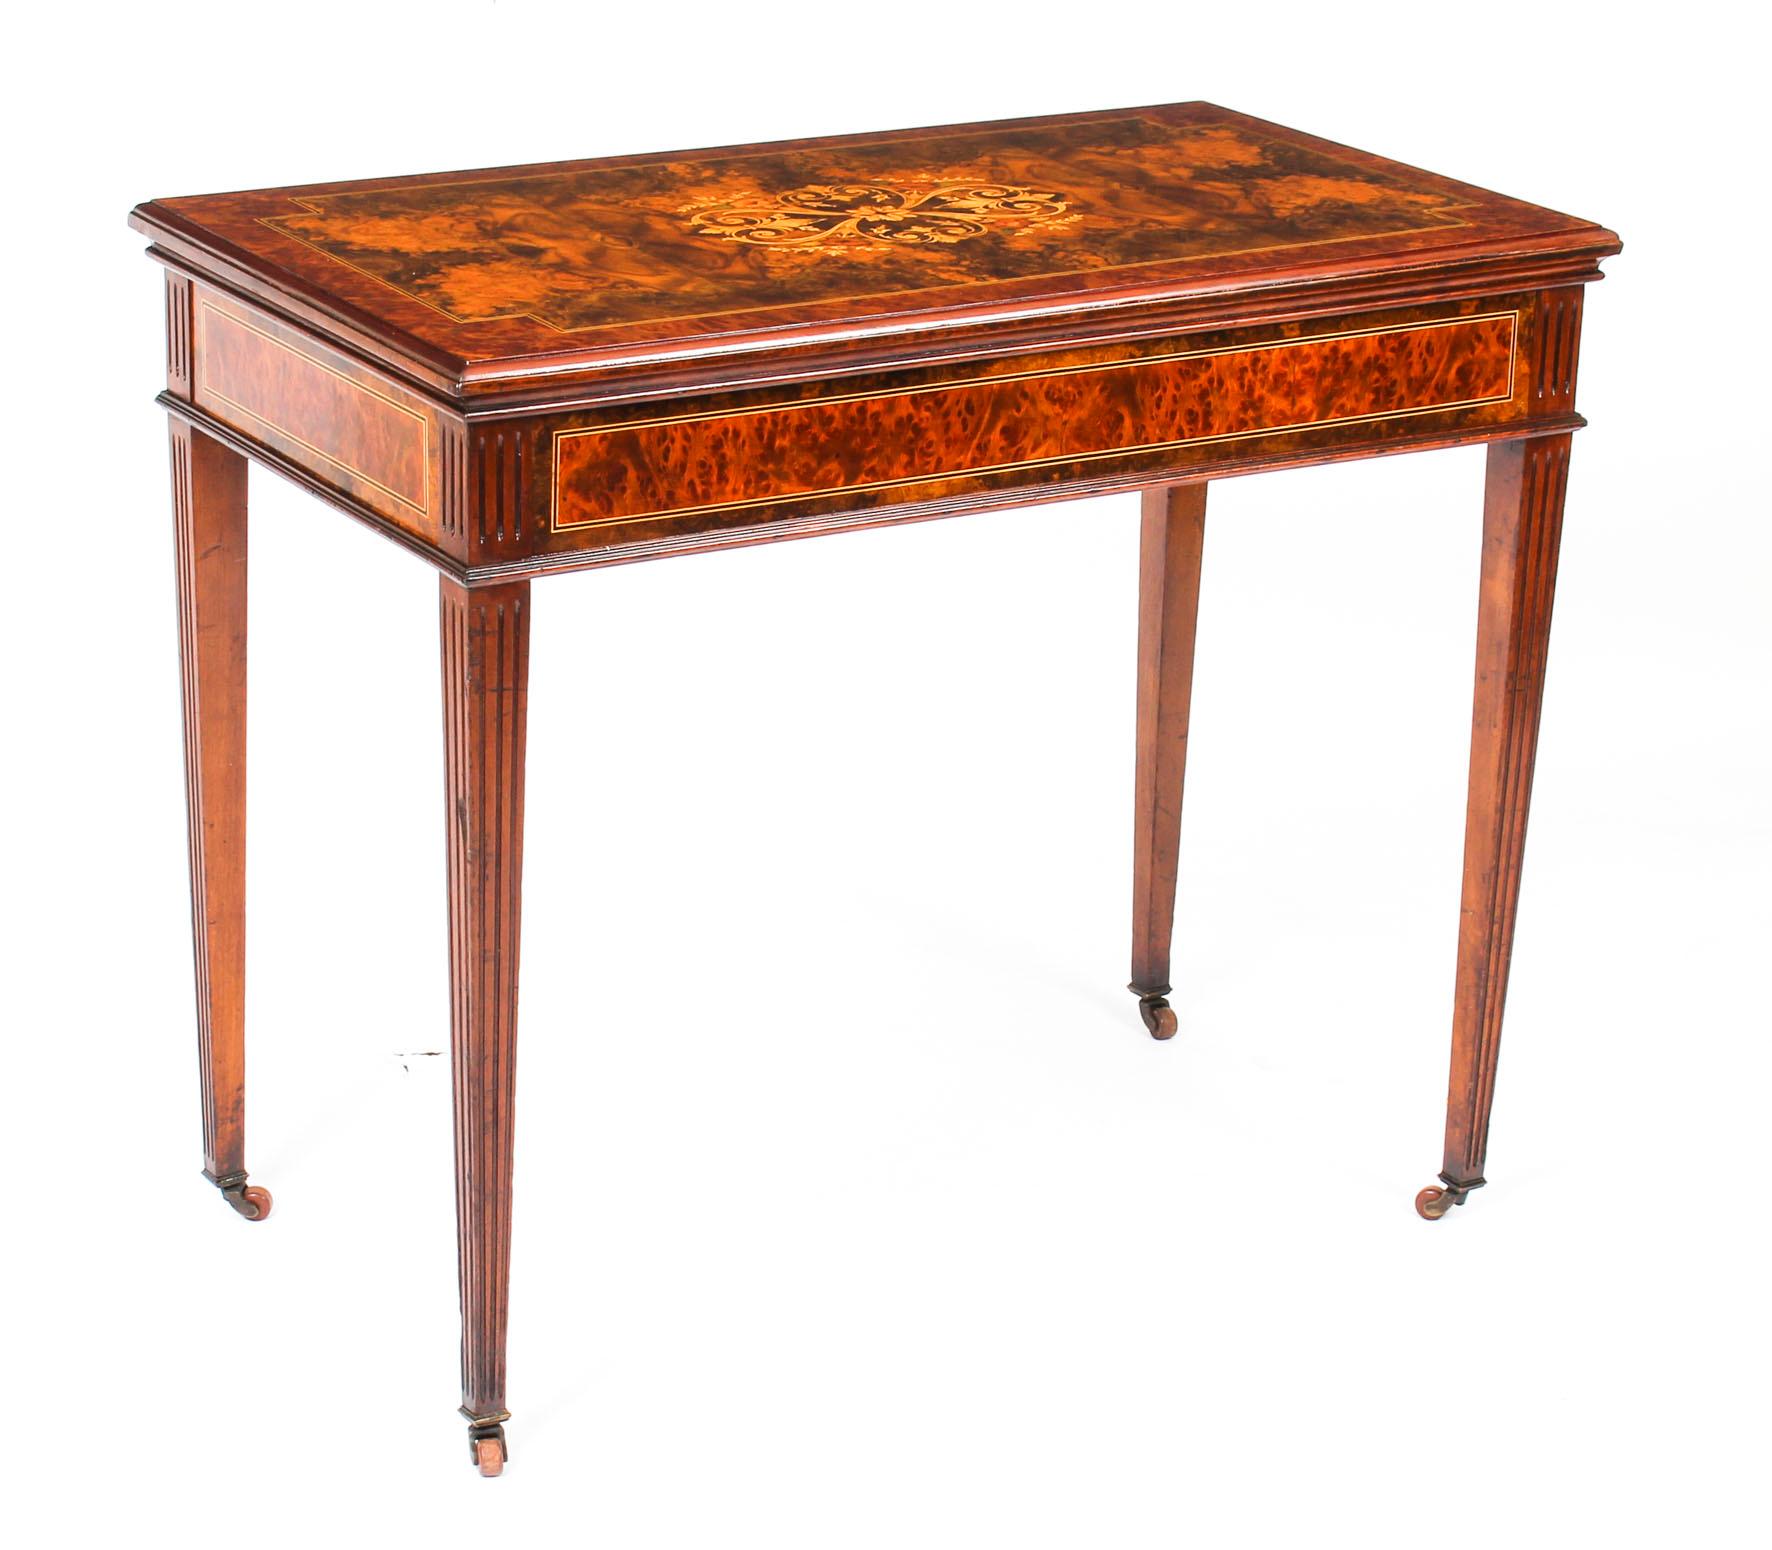 This is a fine antique French burr walnut and marquetry games table, stamped Roulette Francaise, Marque Deposee, circa 1860 in date.

The lift up lid is decorated with foliate and floral marquetry, the reverse features an ebonised and satinwood